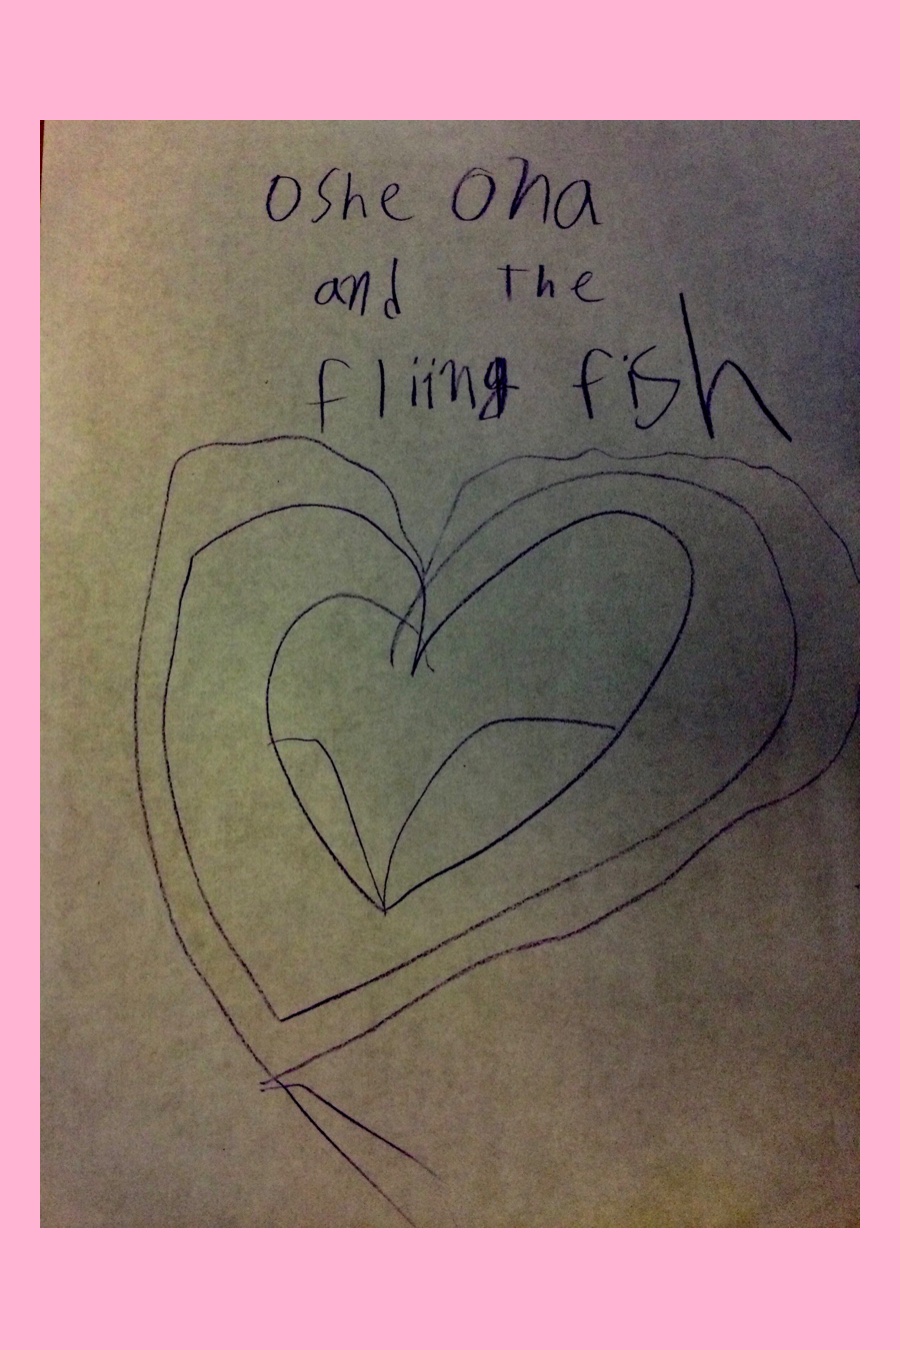 Oceania and the Flying Fish by Meher S